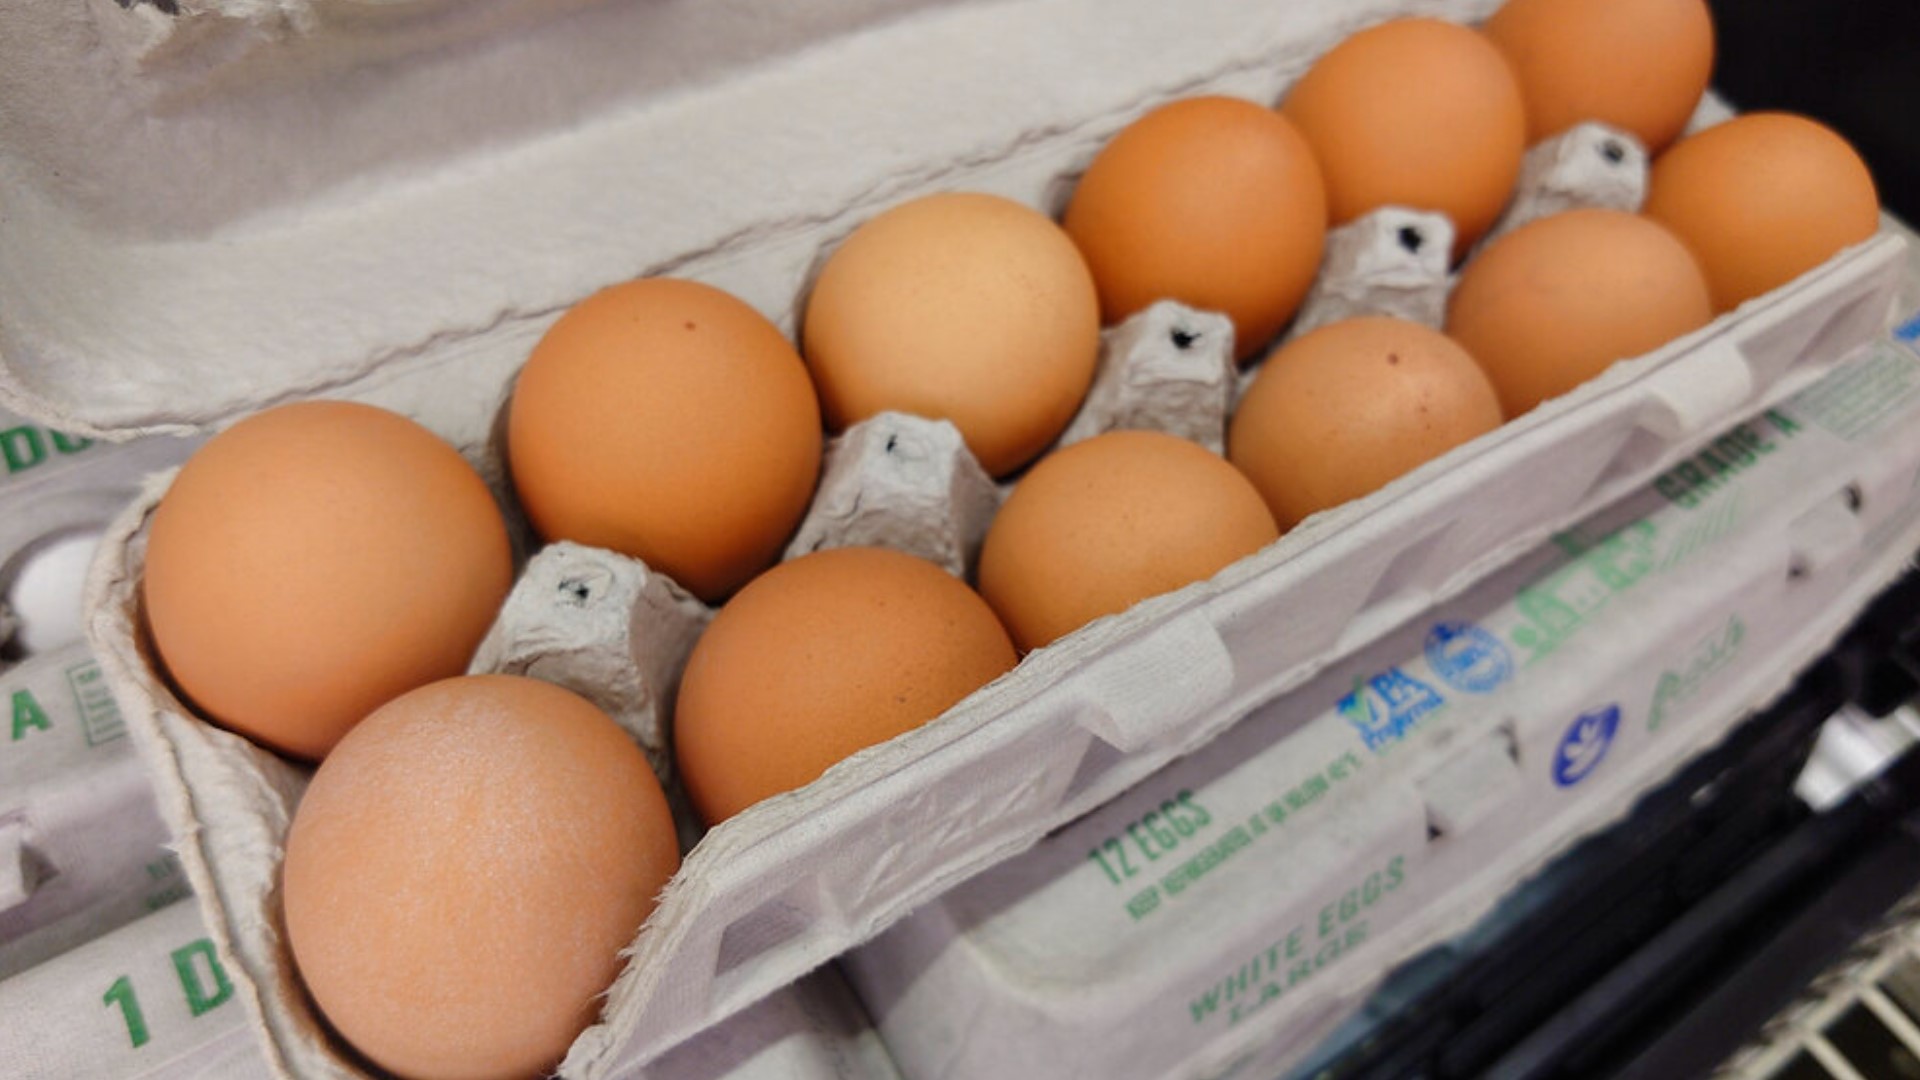 The price increase has also led to many people cutting back or even eliminating eggs from their grocery cart. Newswatch 16's Nikki Krize explains what's happening.